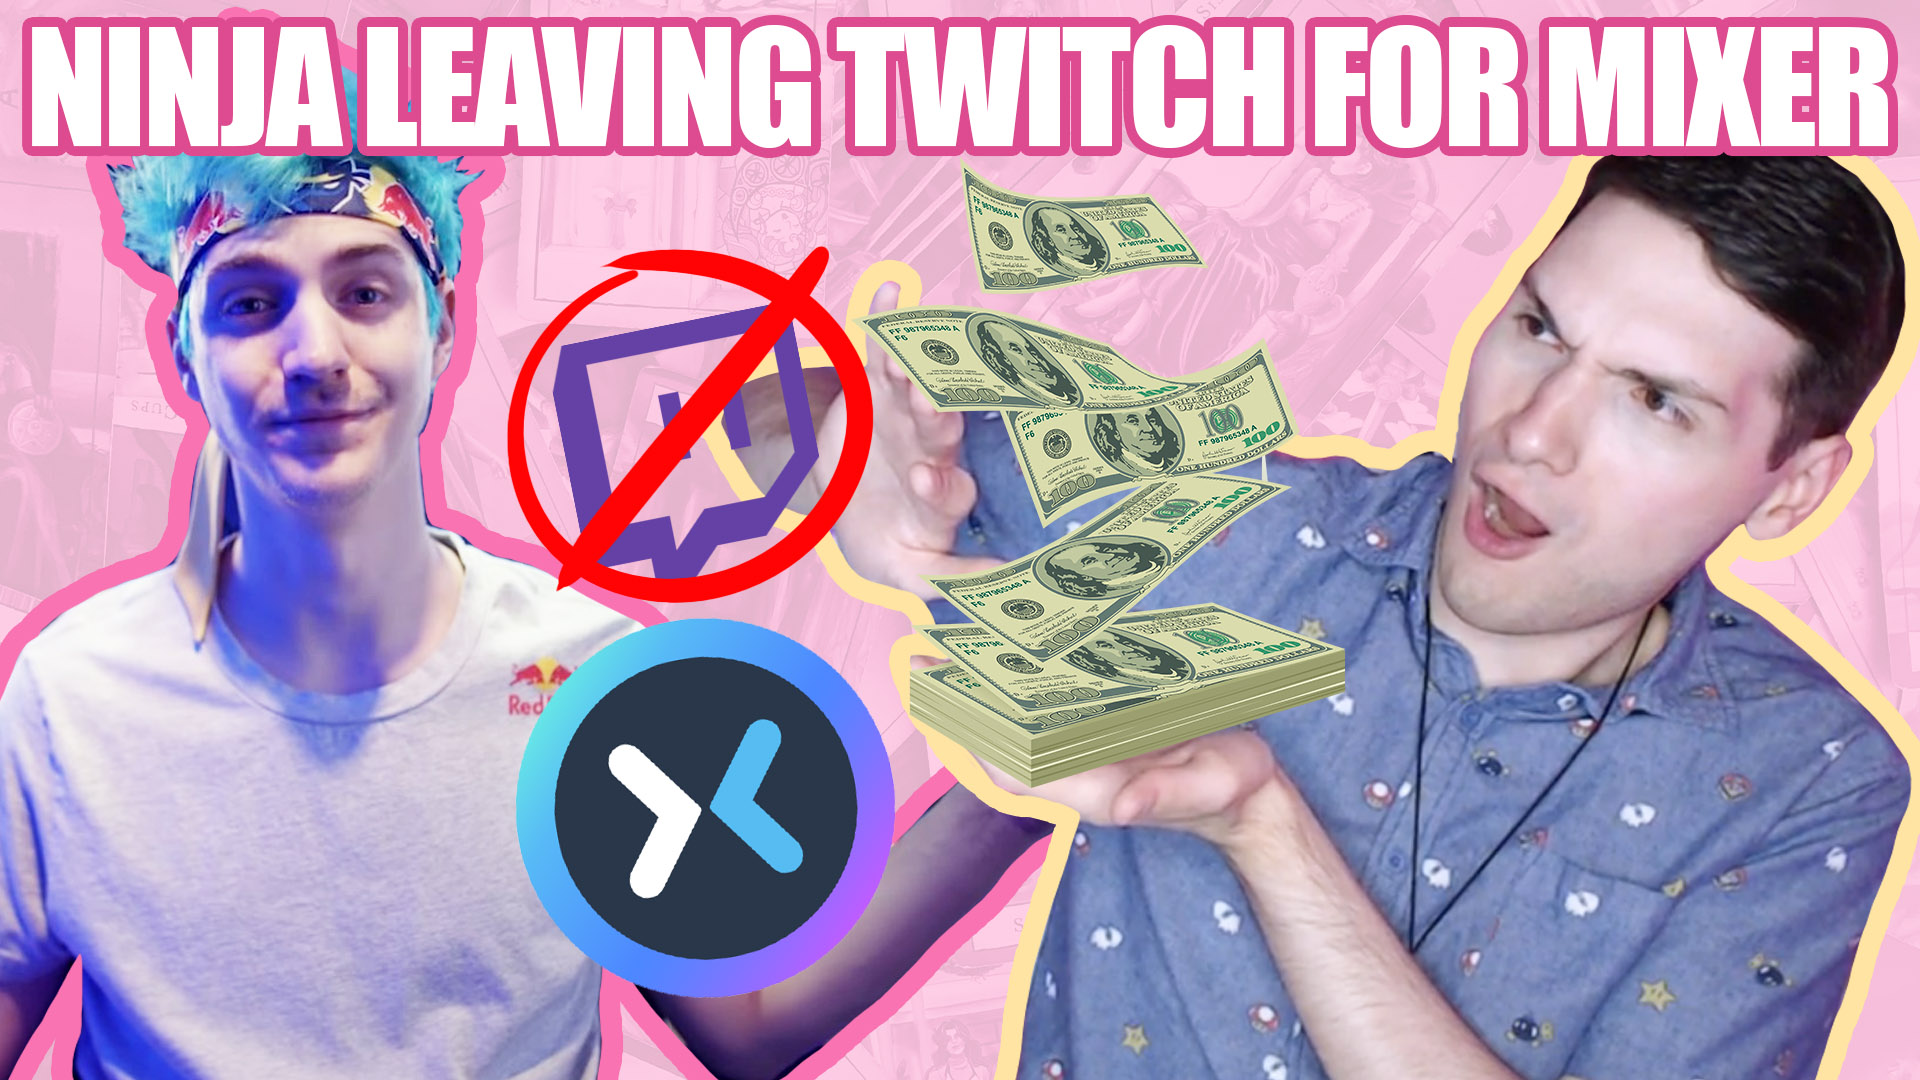 ninja leaving twitch for mixer